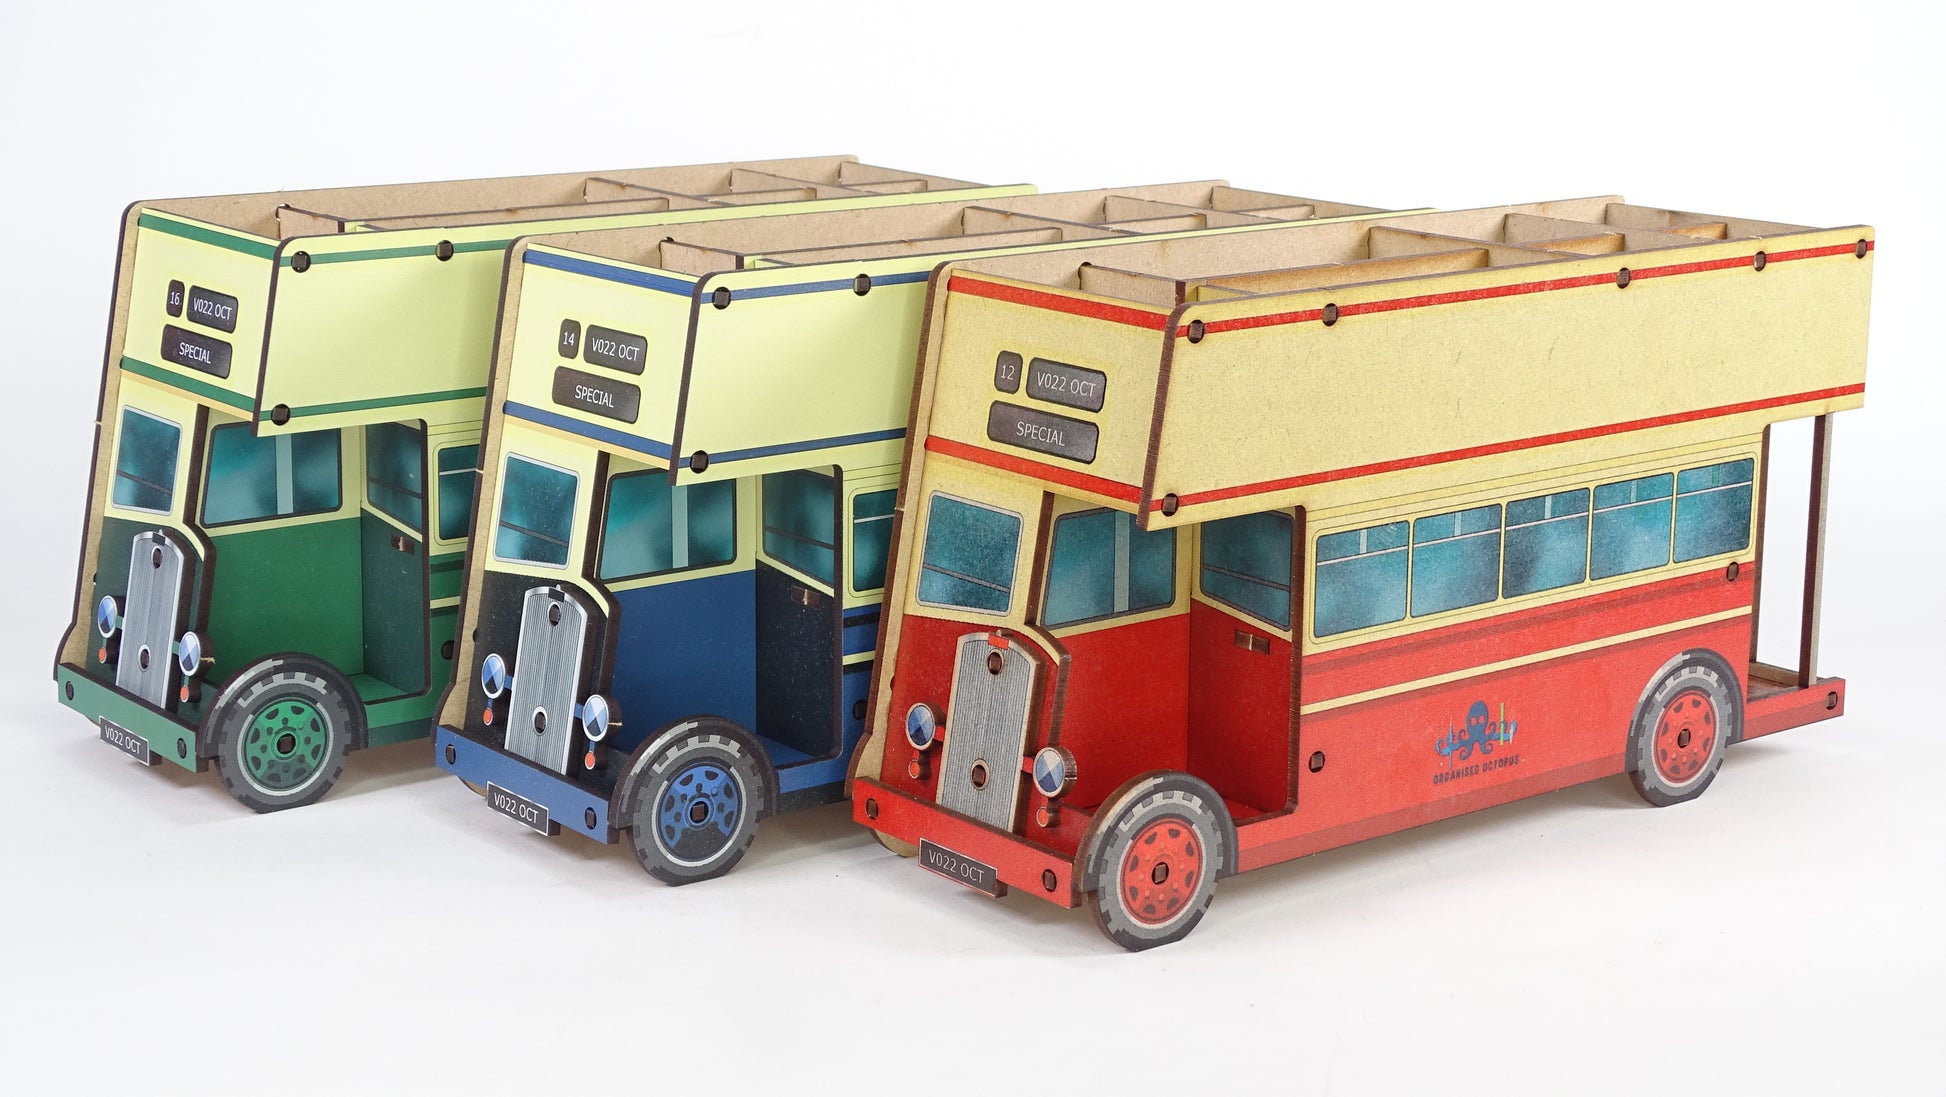 3 Open Top Double Deck Buses - Red, Blue and Green